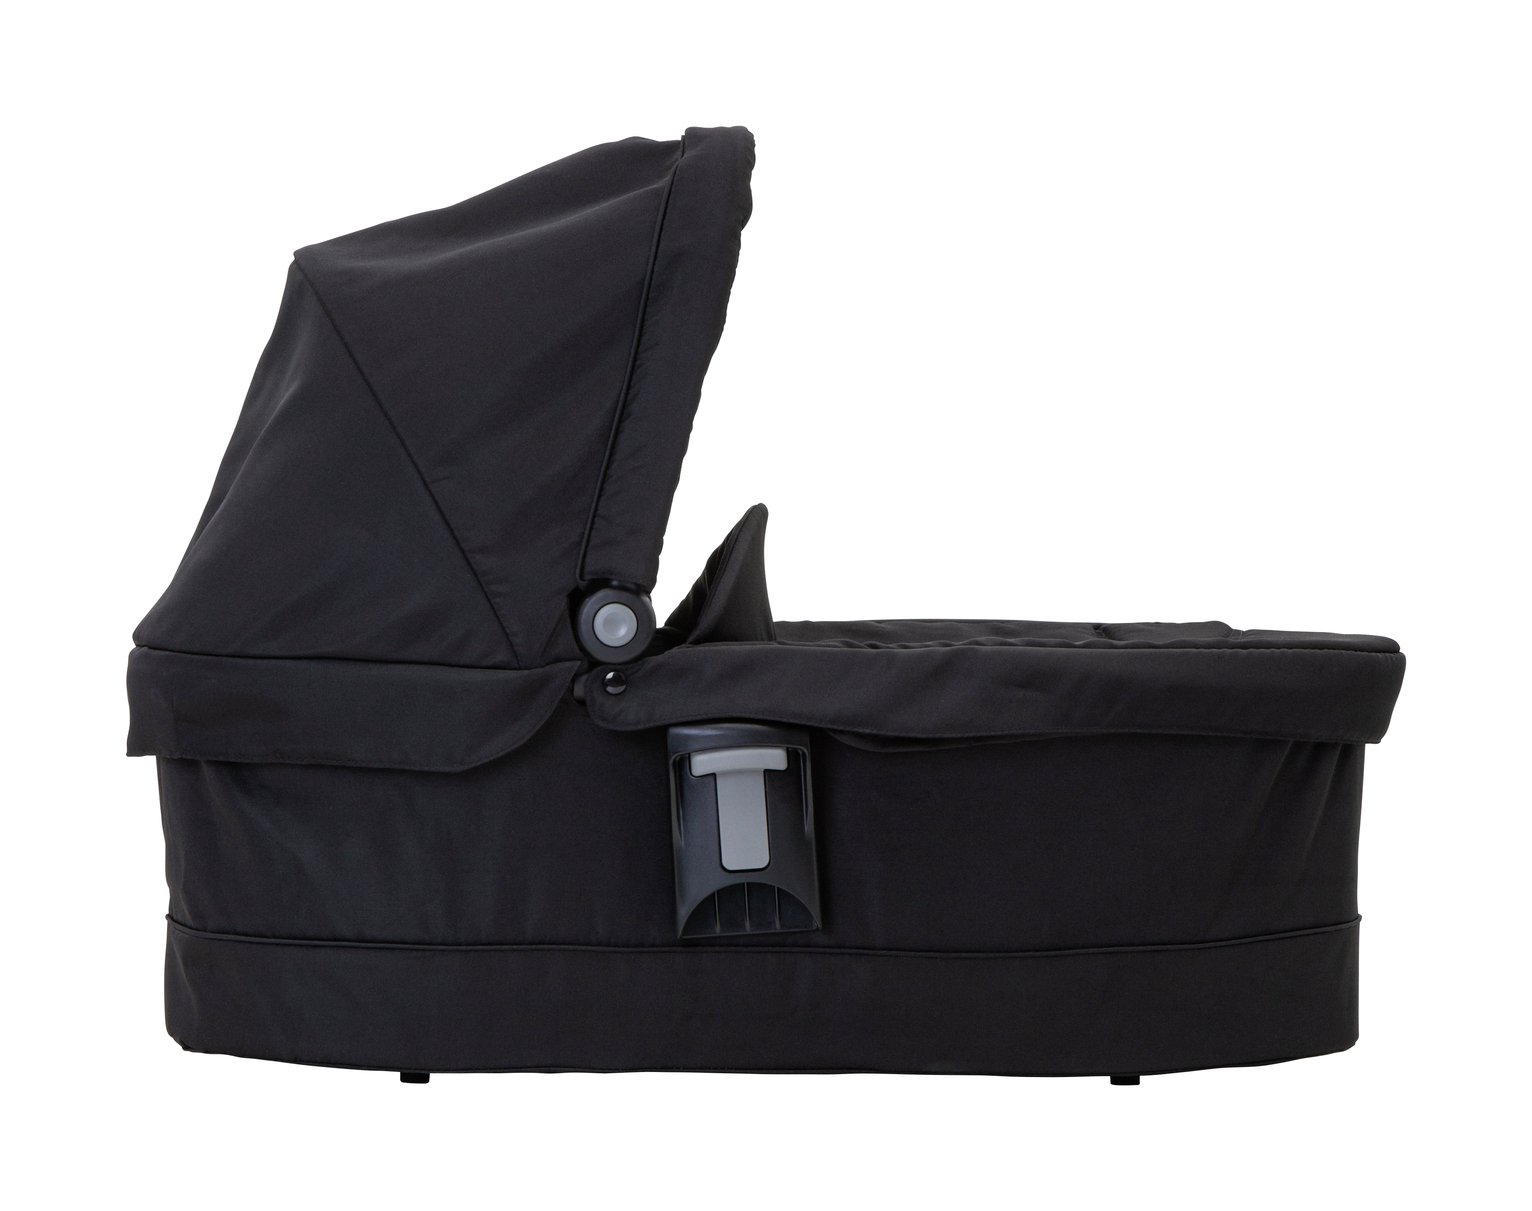 Graco EVO Luxury Carrycot Review